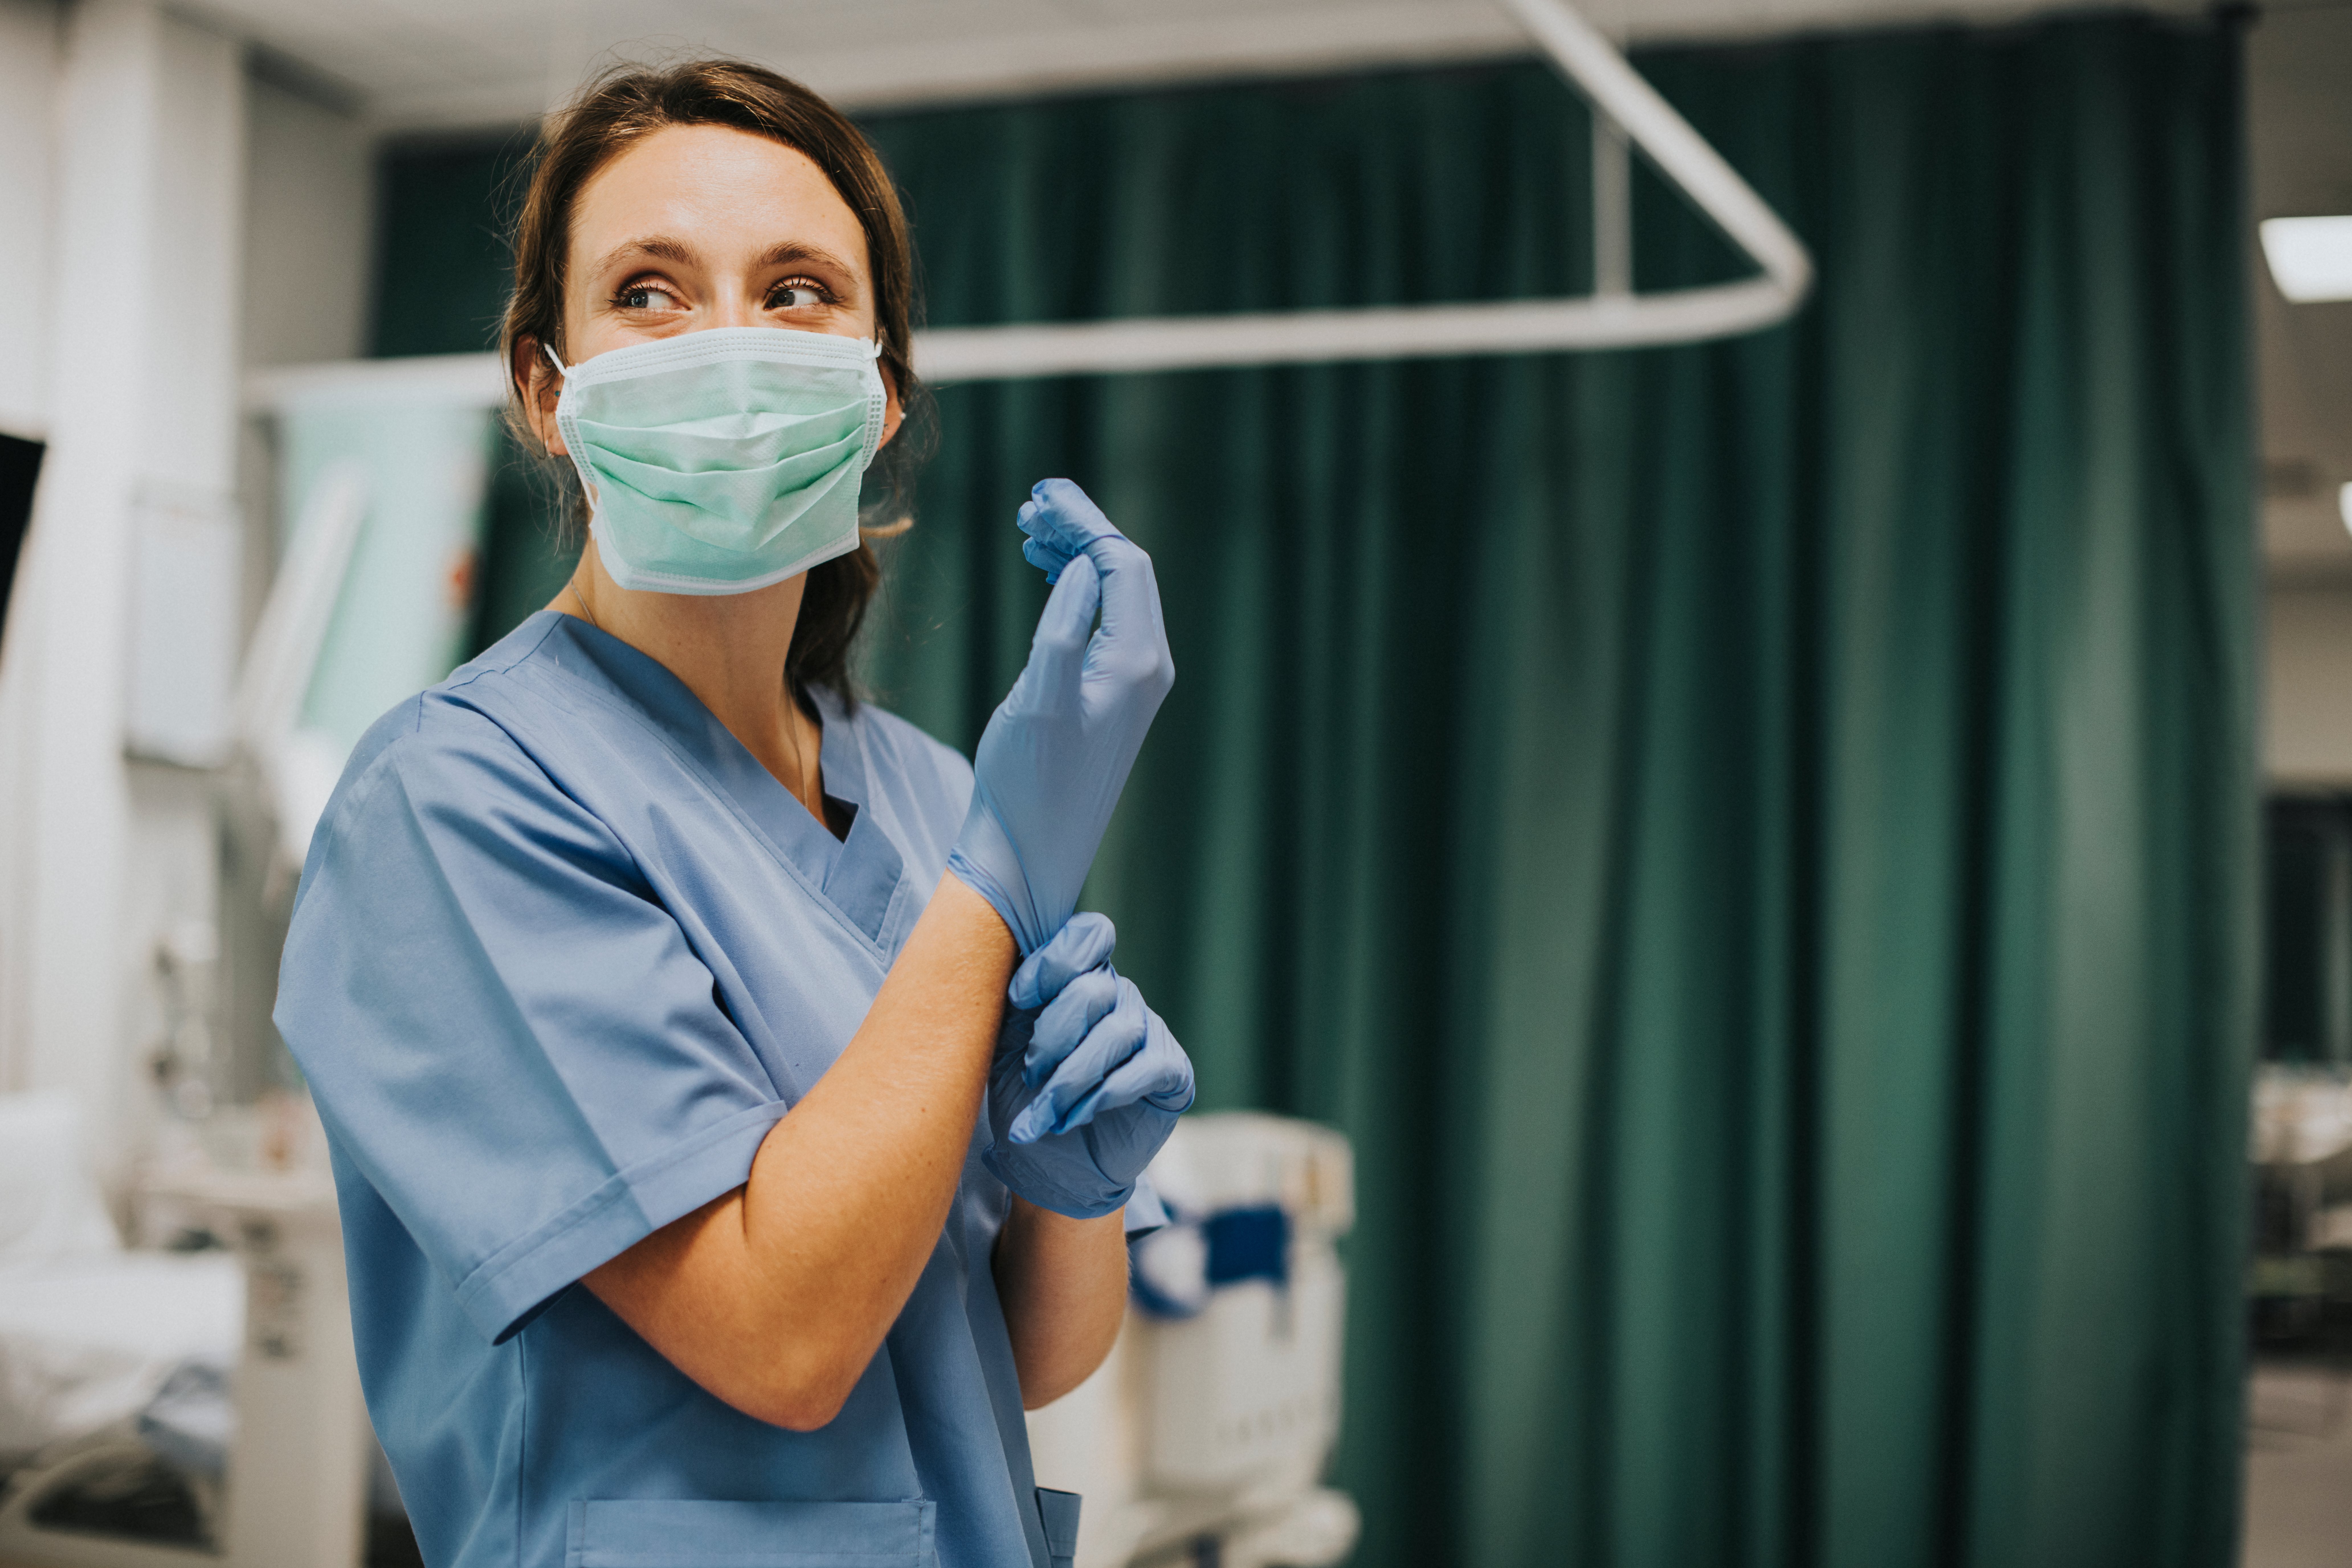 A Female nurse with a mask putting on gloves | Photo: Shutterstock